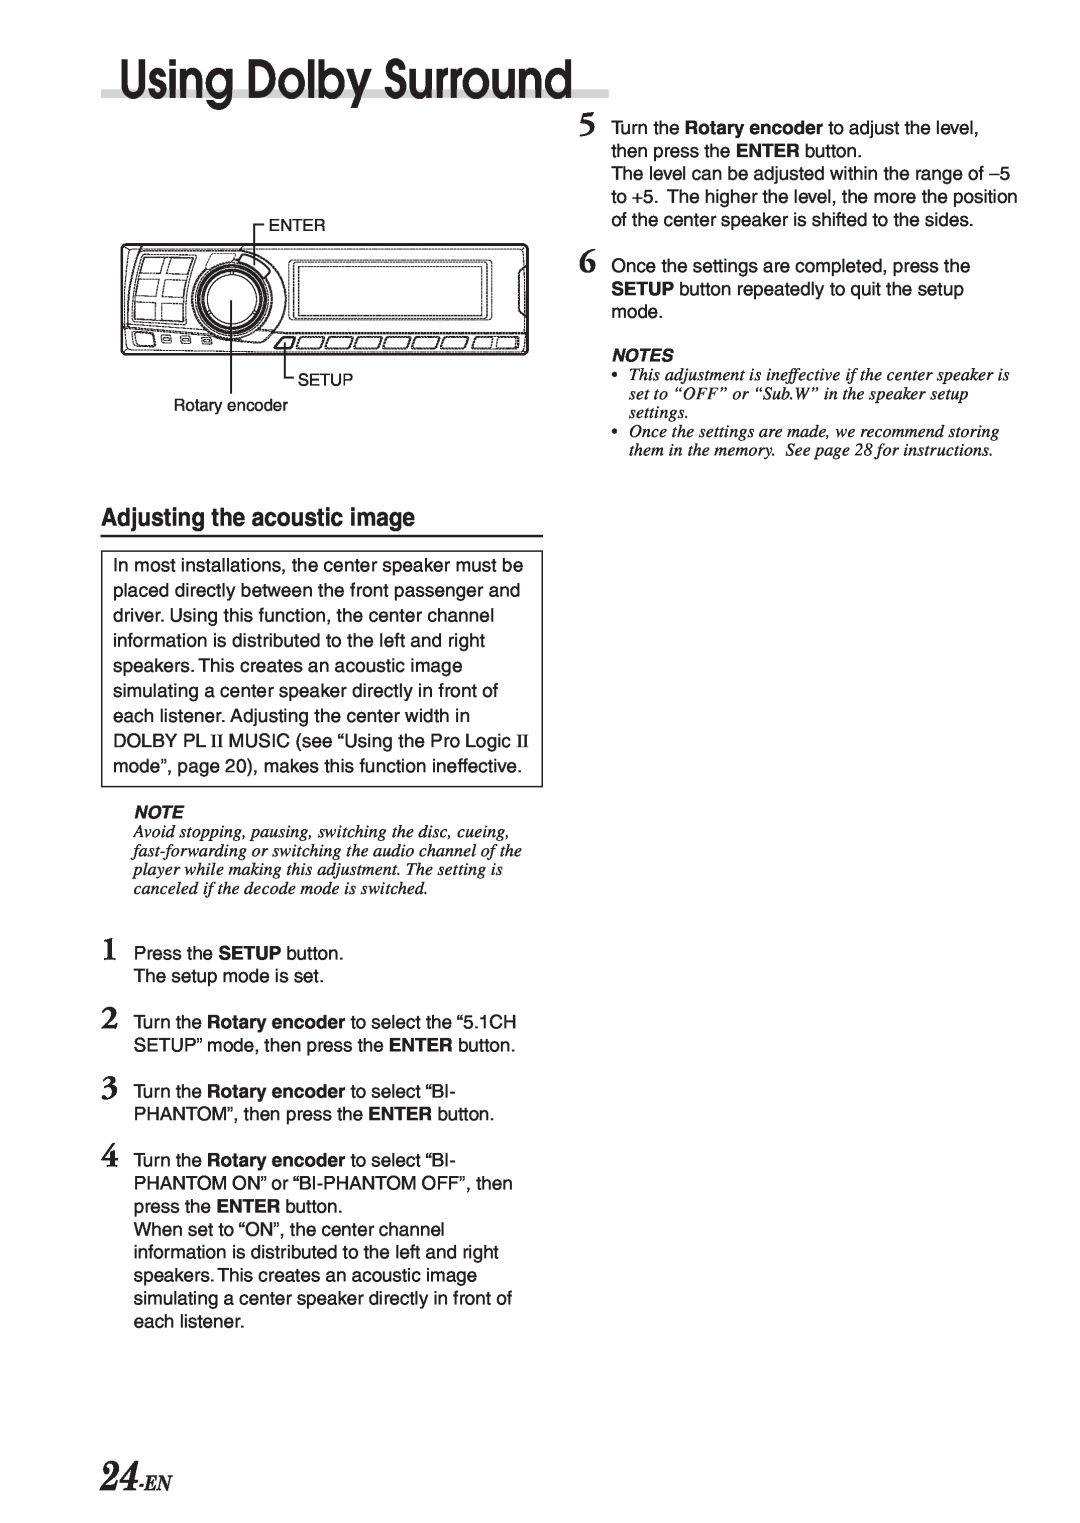 Alpine PXA-H701 owner manual Using Dolby Surround, Adjusting the acoustic image, 24-EN 